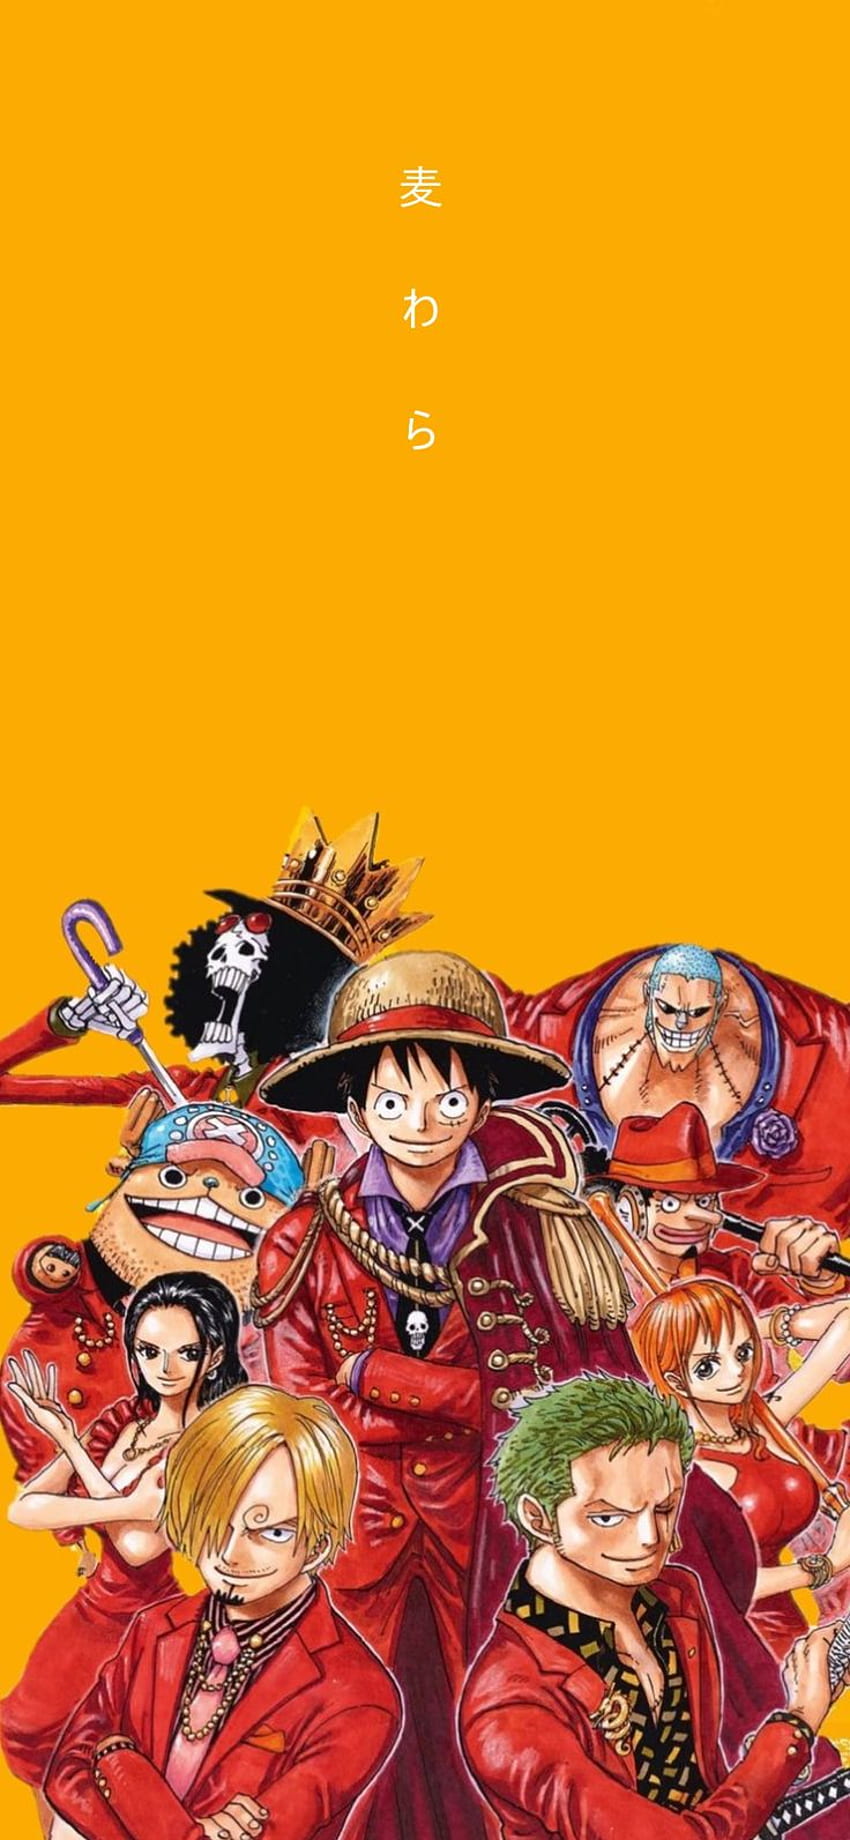 Everything you need to know about anime sensation One Piece